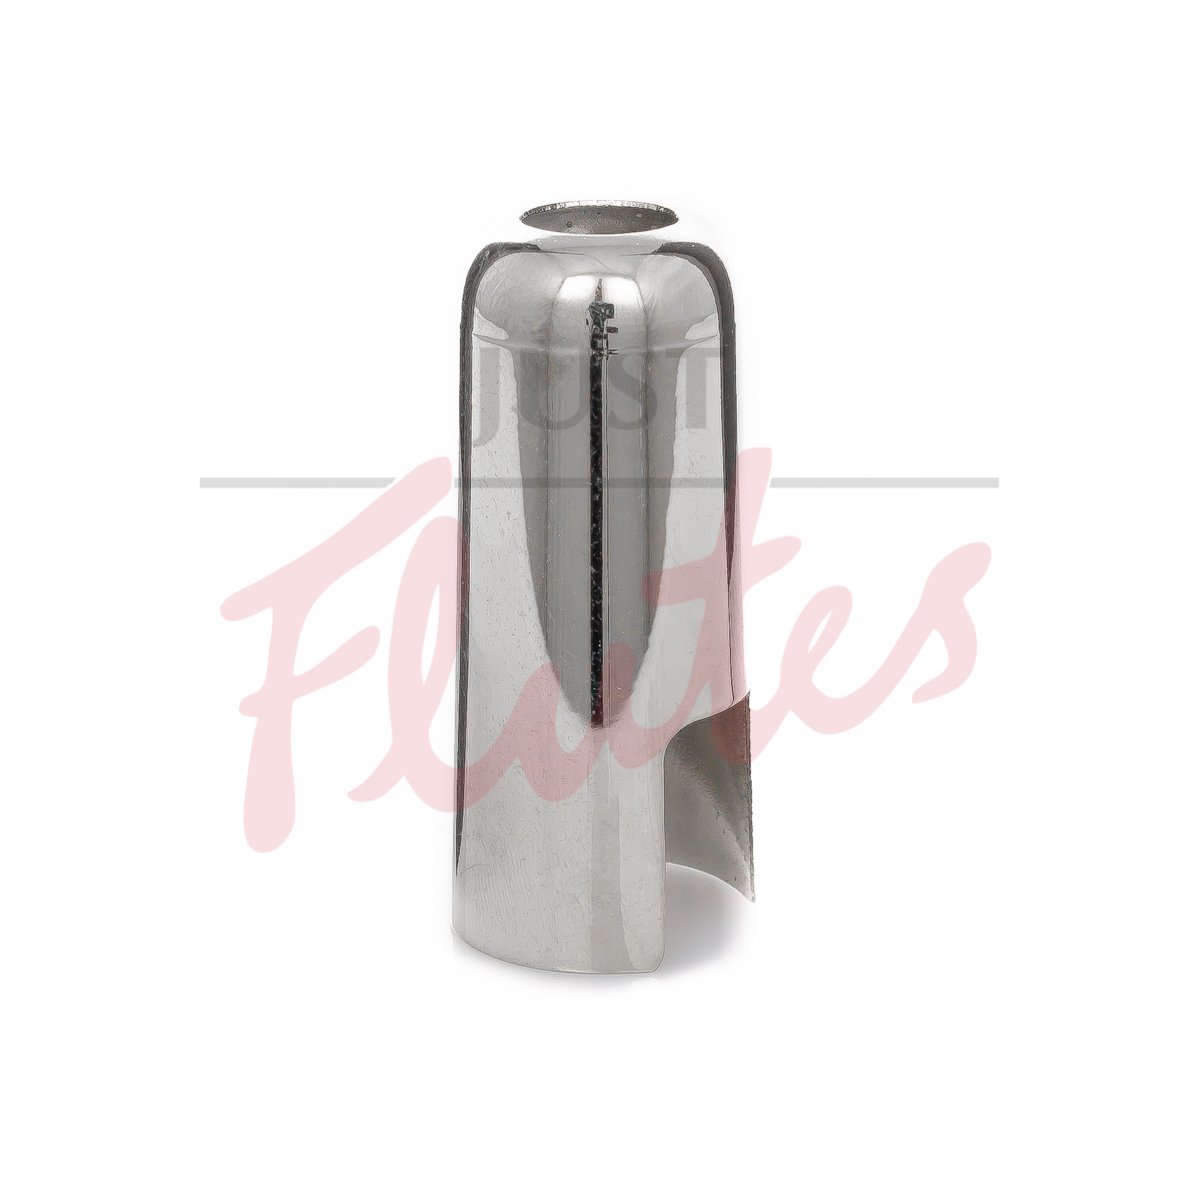 Nickel-plated Clarinet Mouthpiece Cap